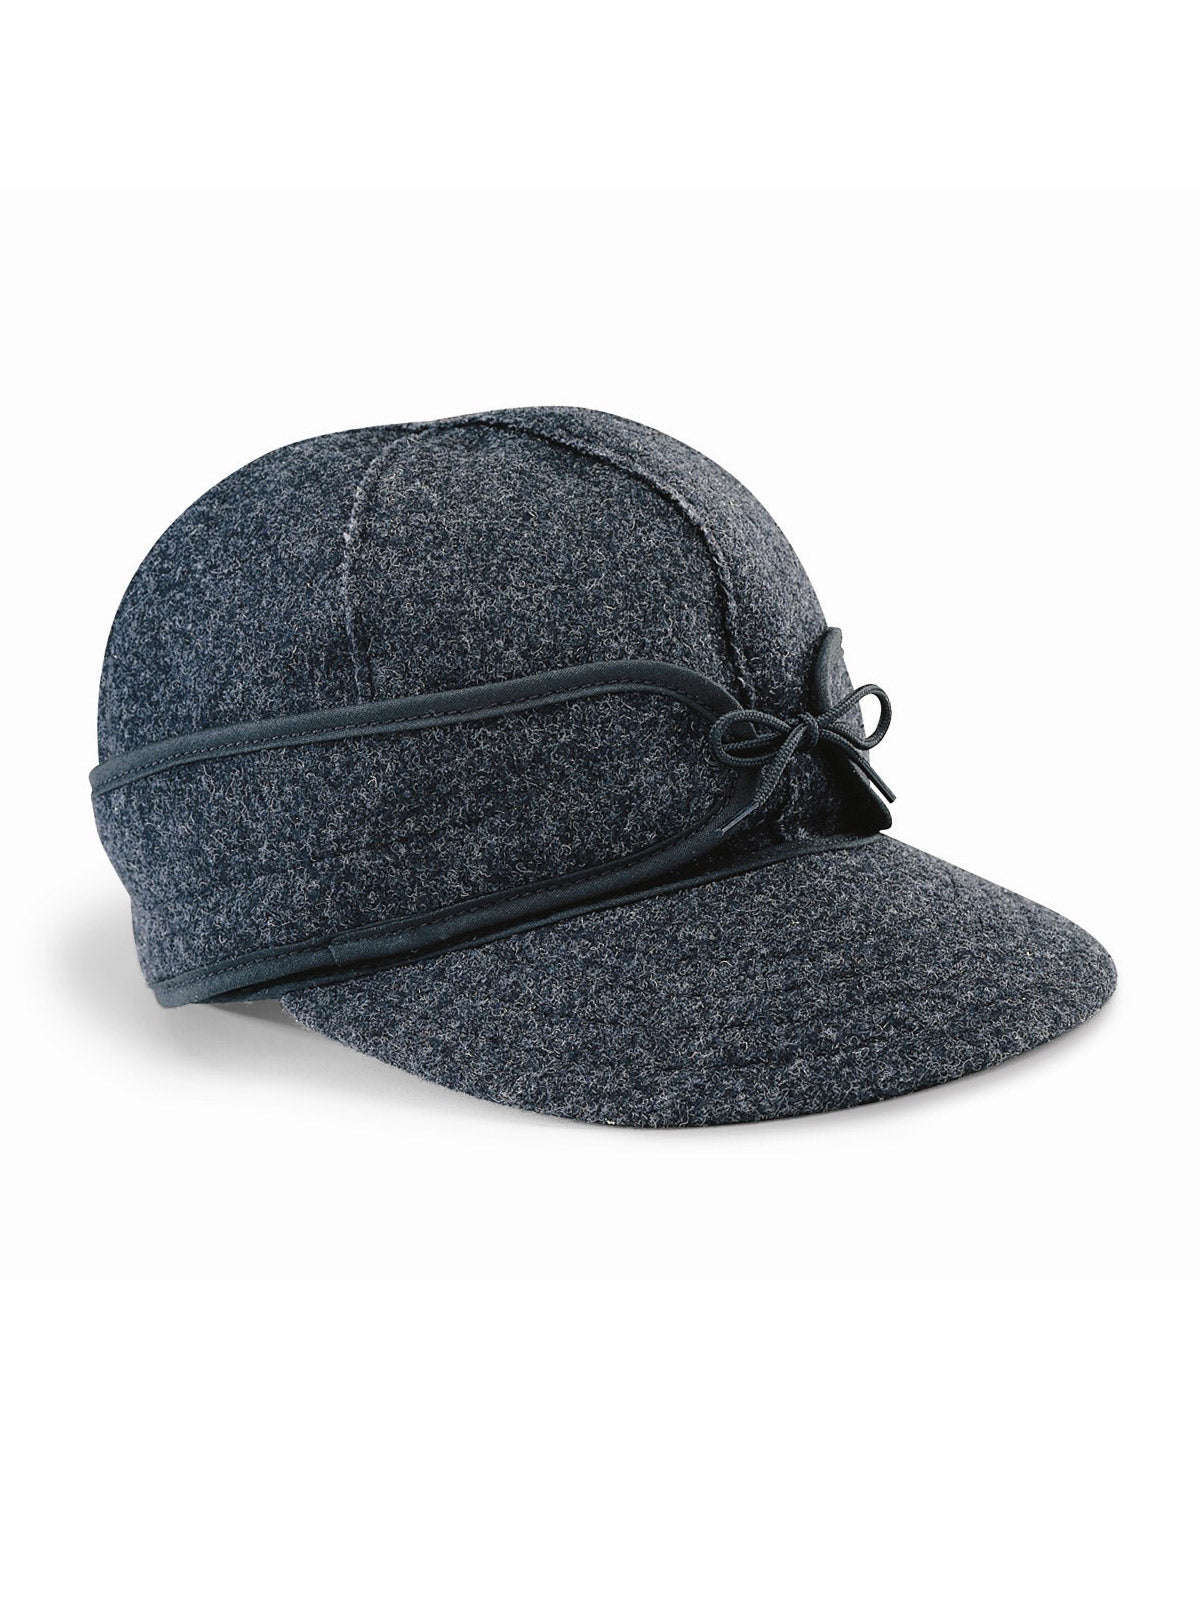 Origional Stormy Kromer Caps With Ear Band in Charcoal Grey - 50010-CHA